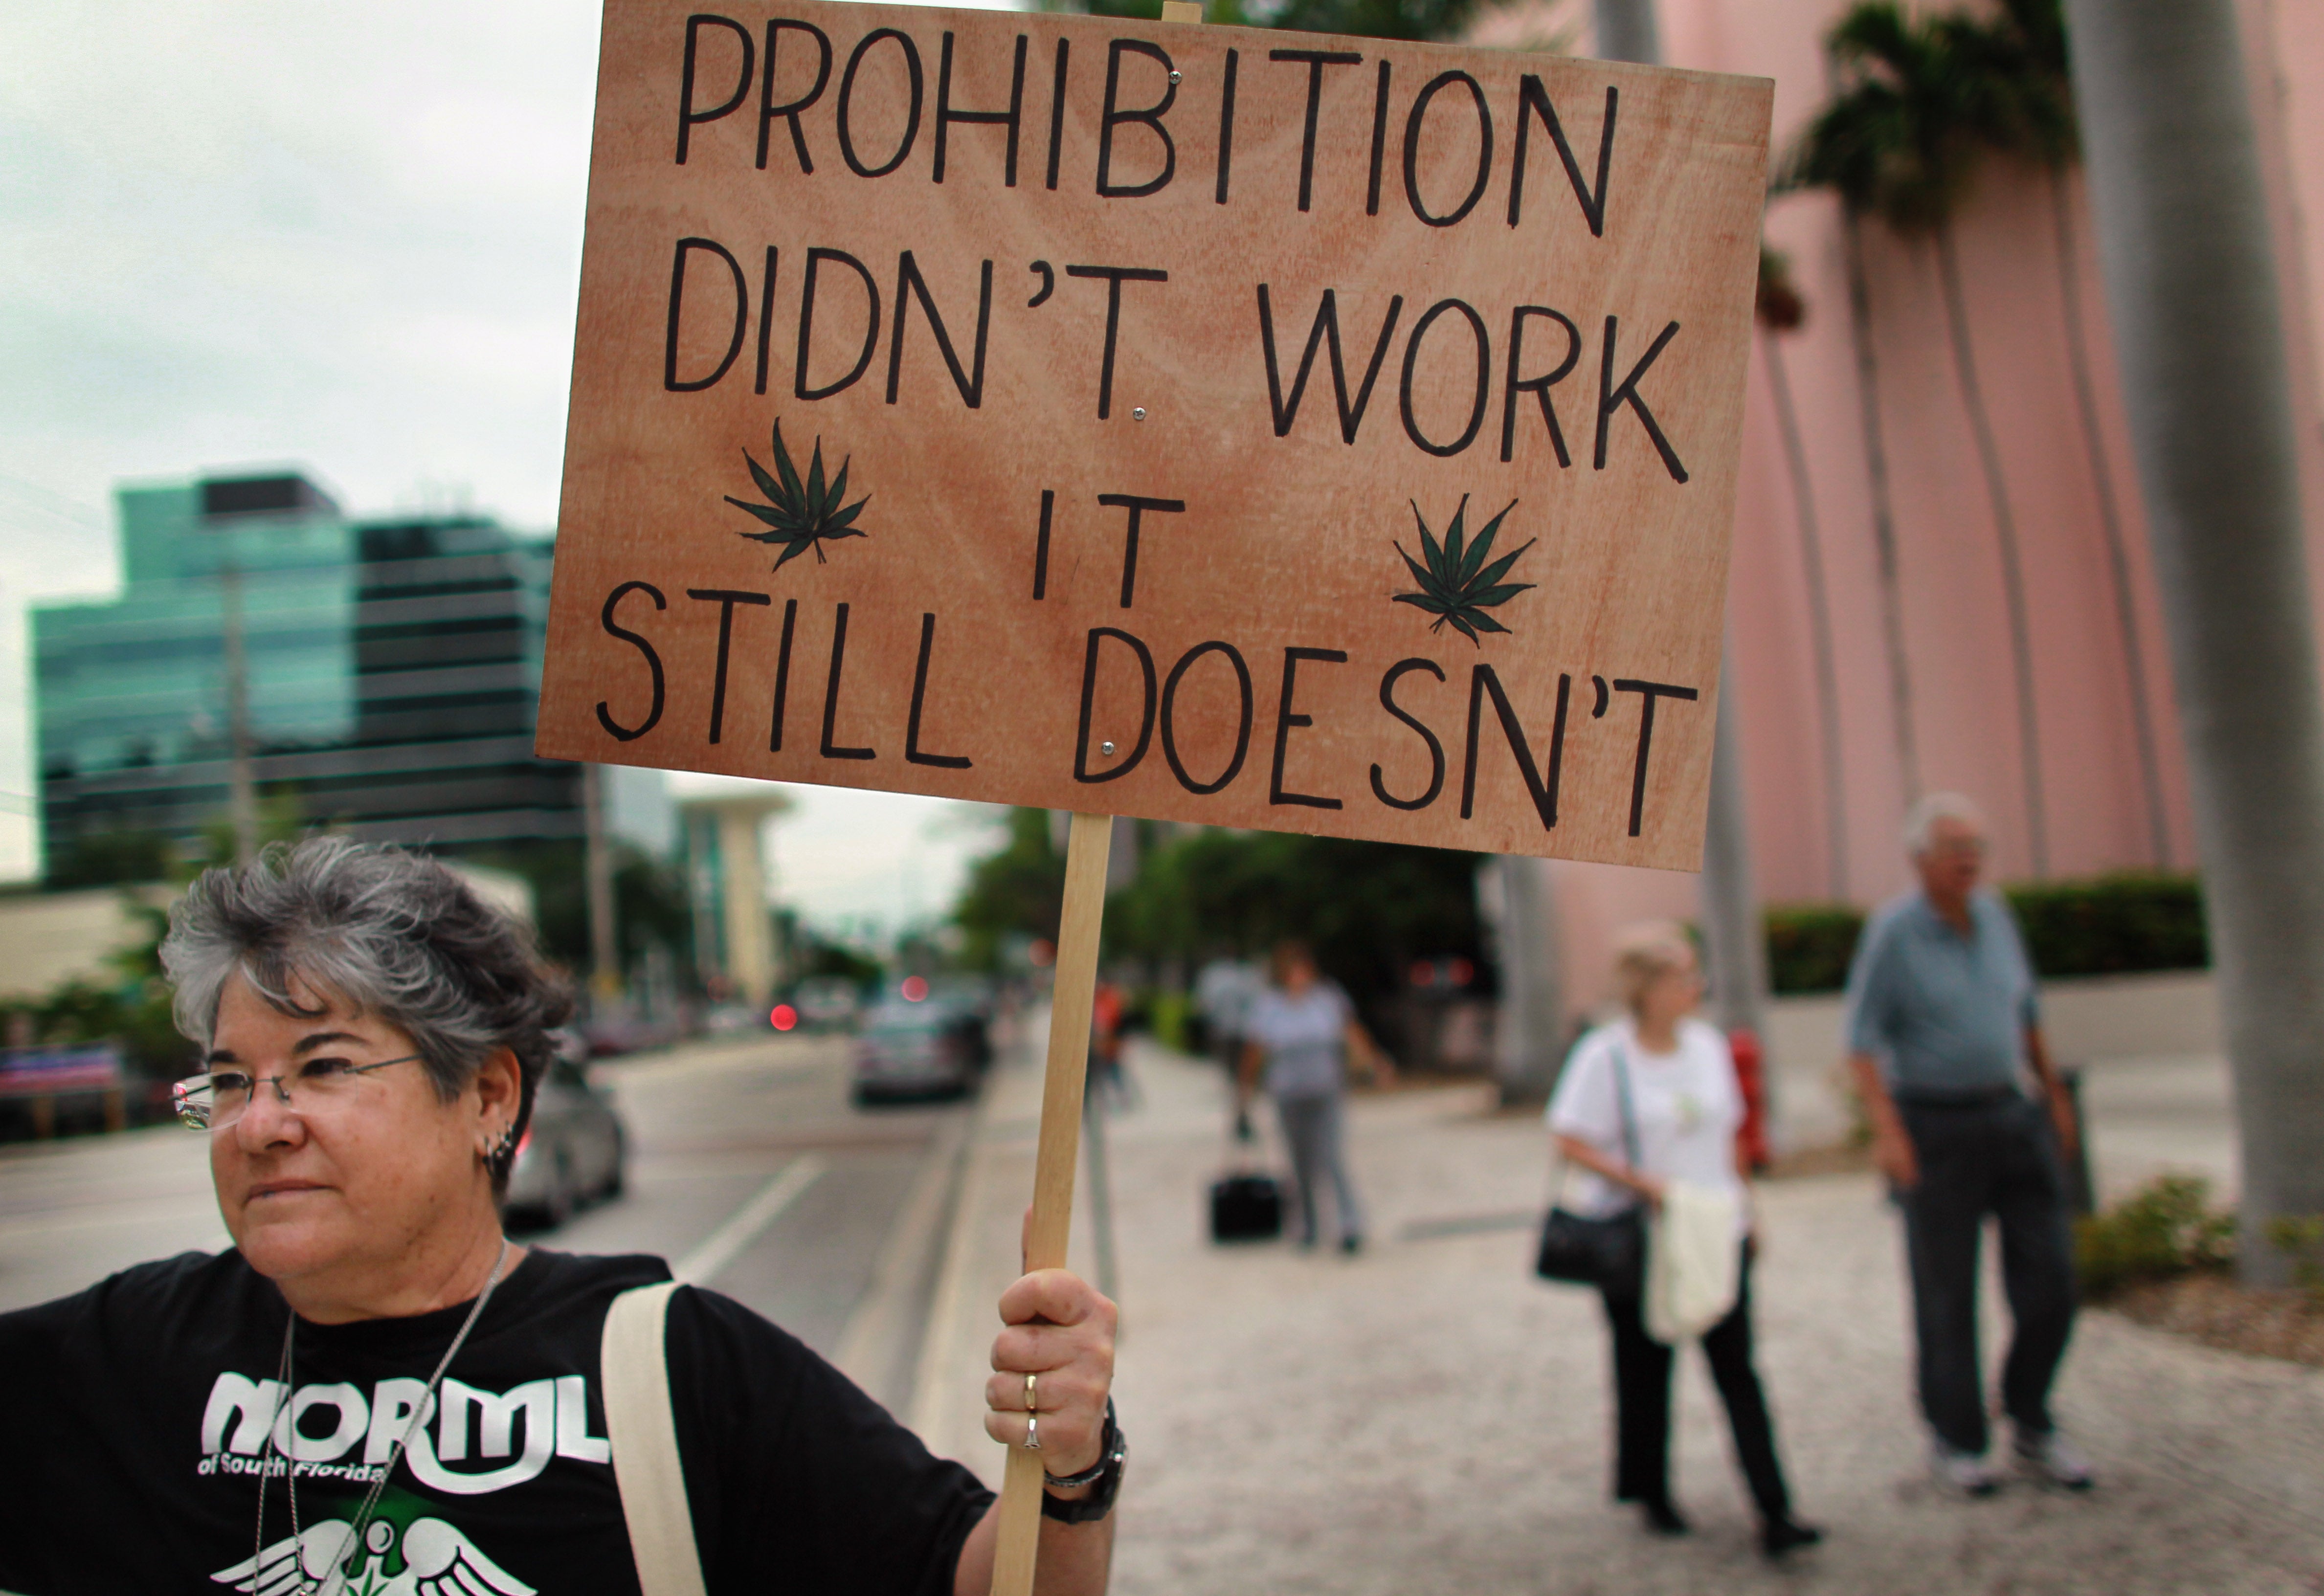 A woman attends a rally for the legalisation of marijuana in Florida in 2010